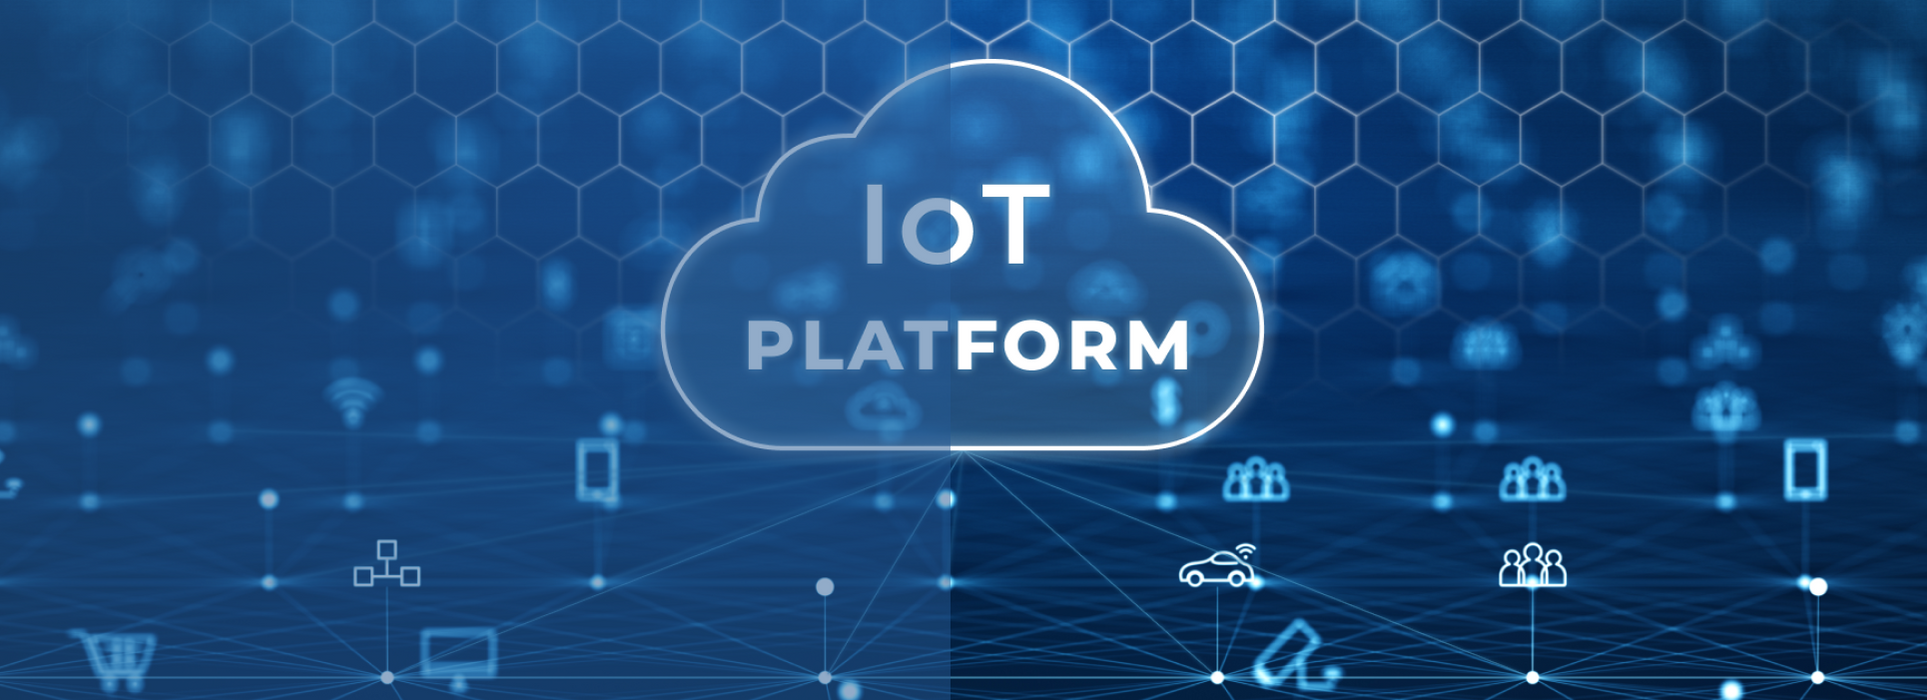 What is an IoT Platform - IOT Platform for smart home